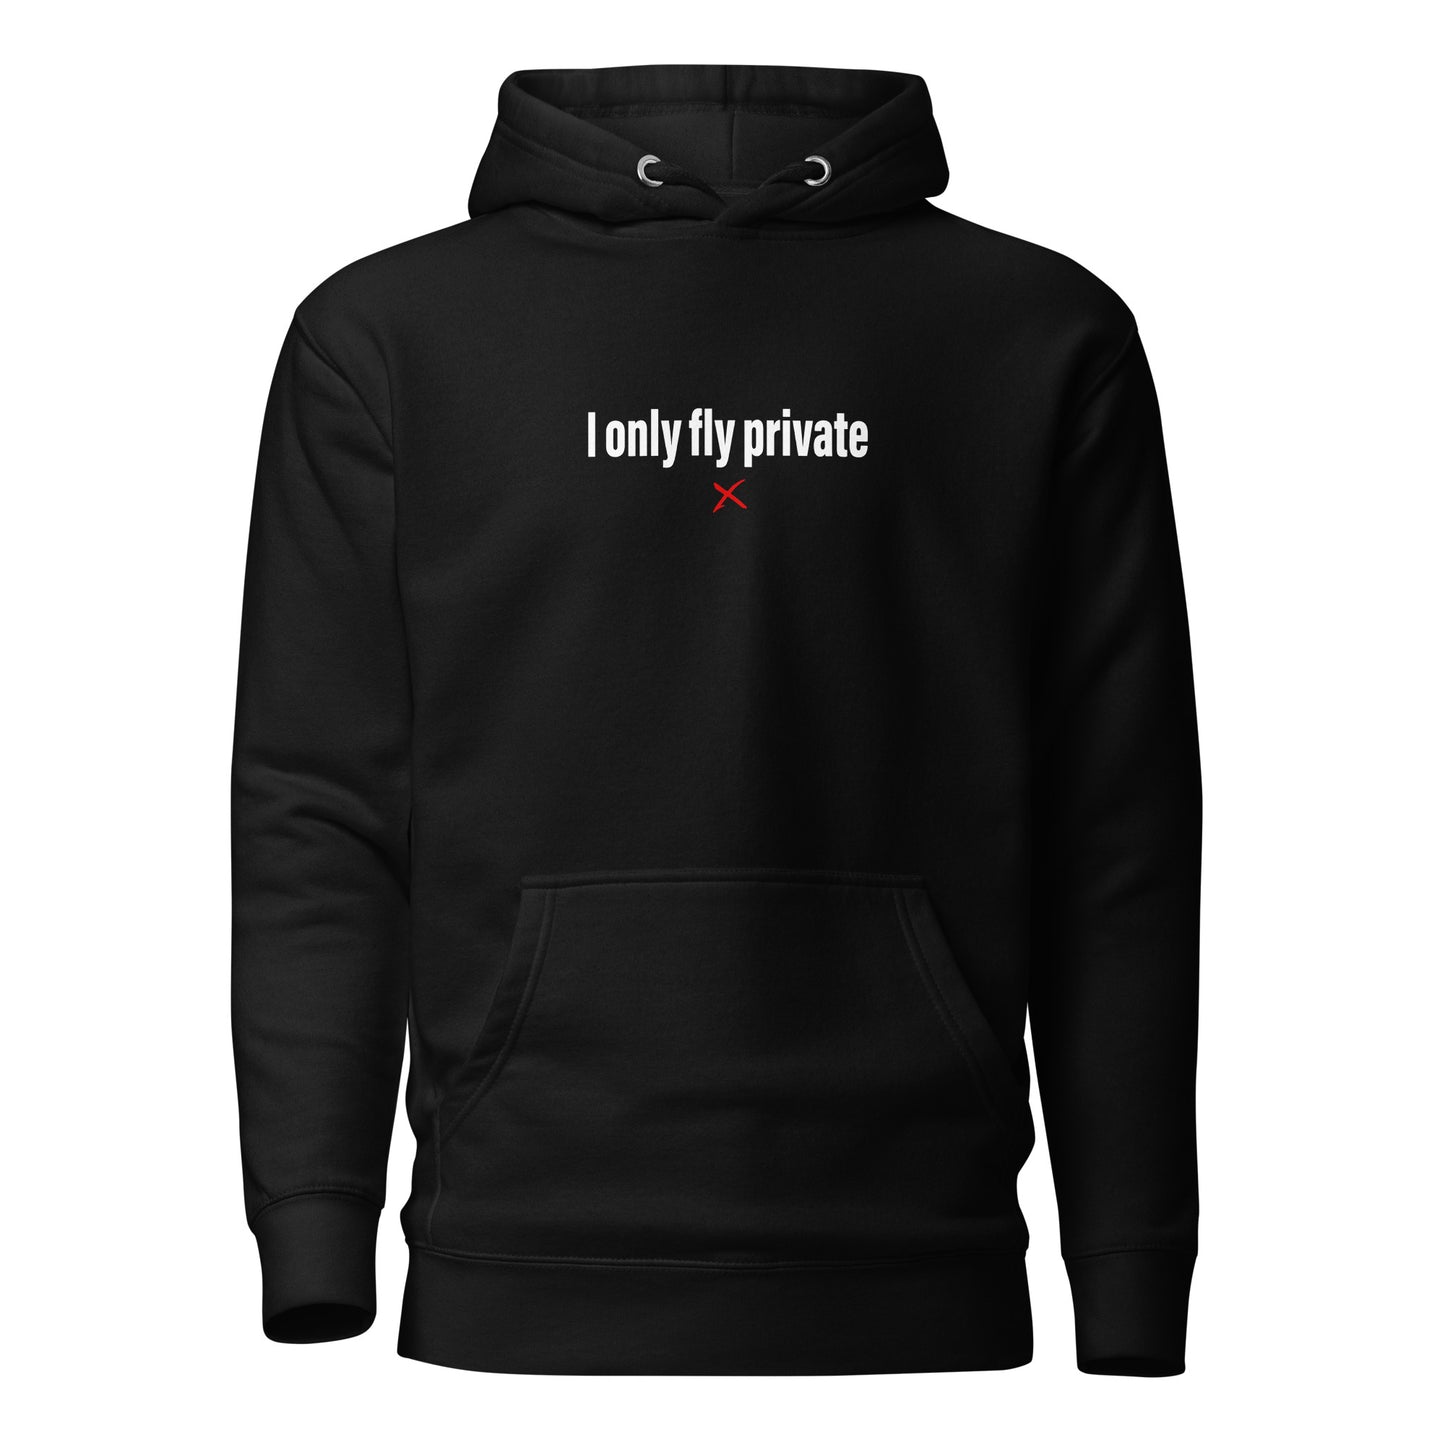 I only fly private - Hoodie